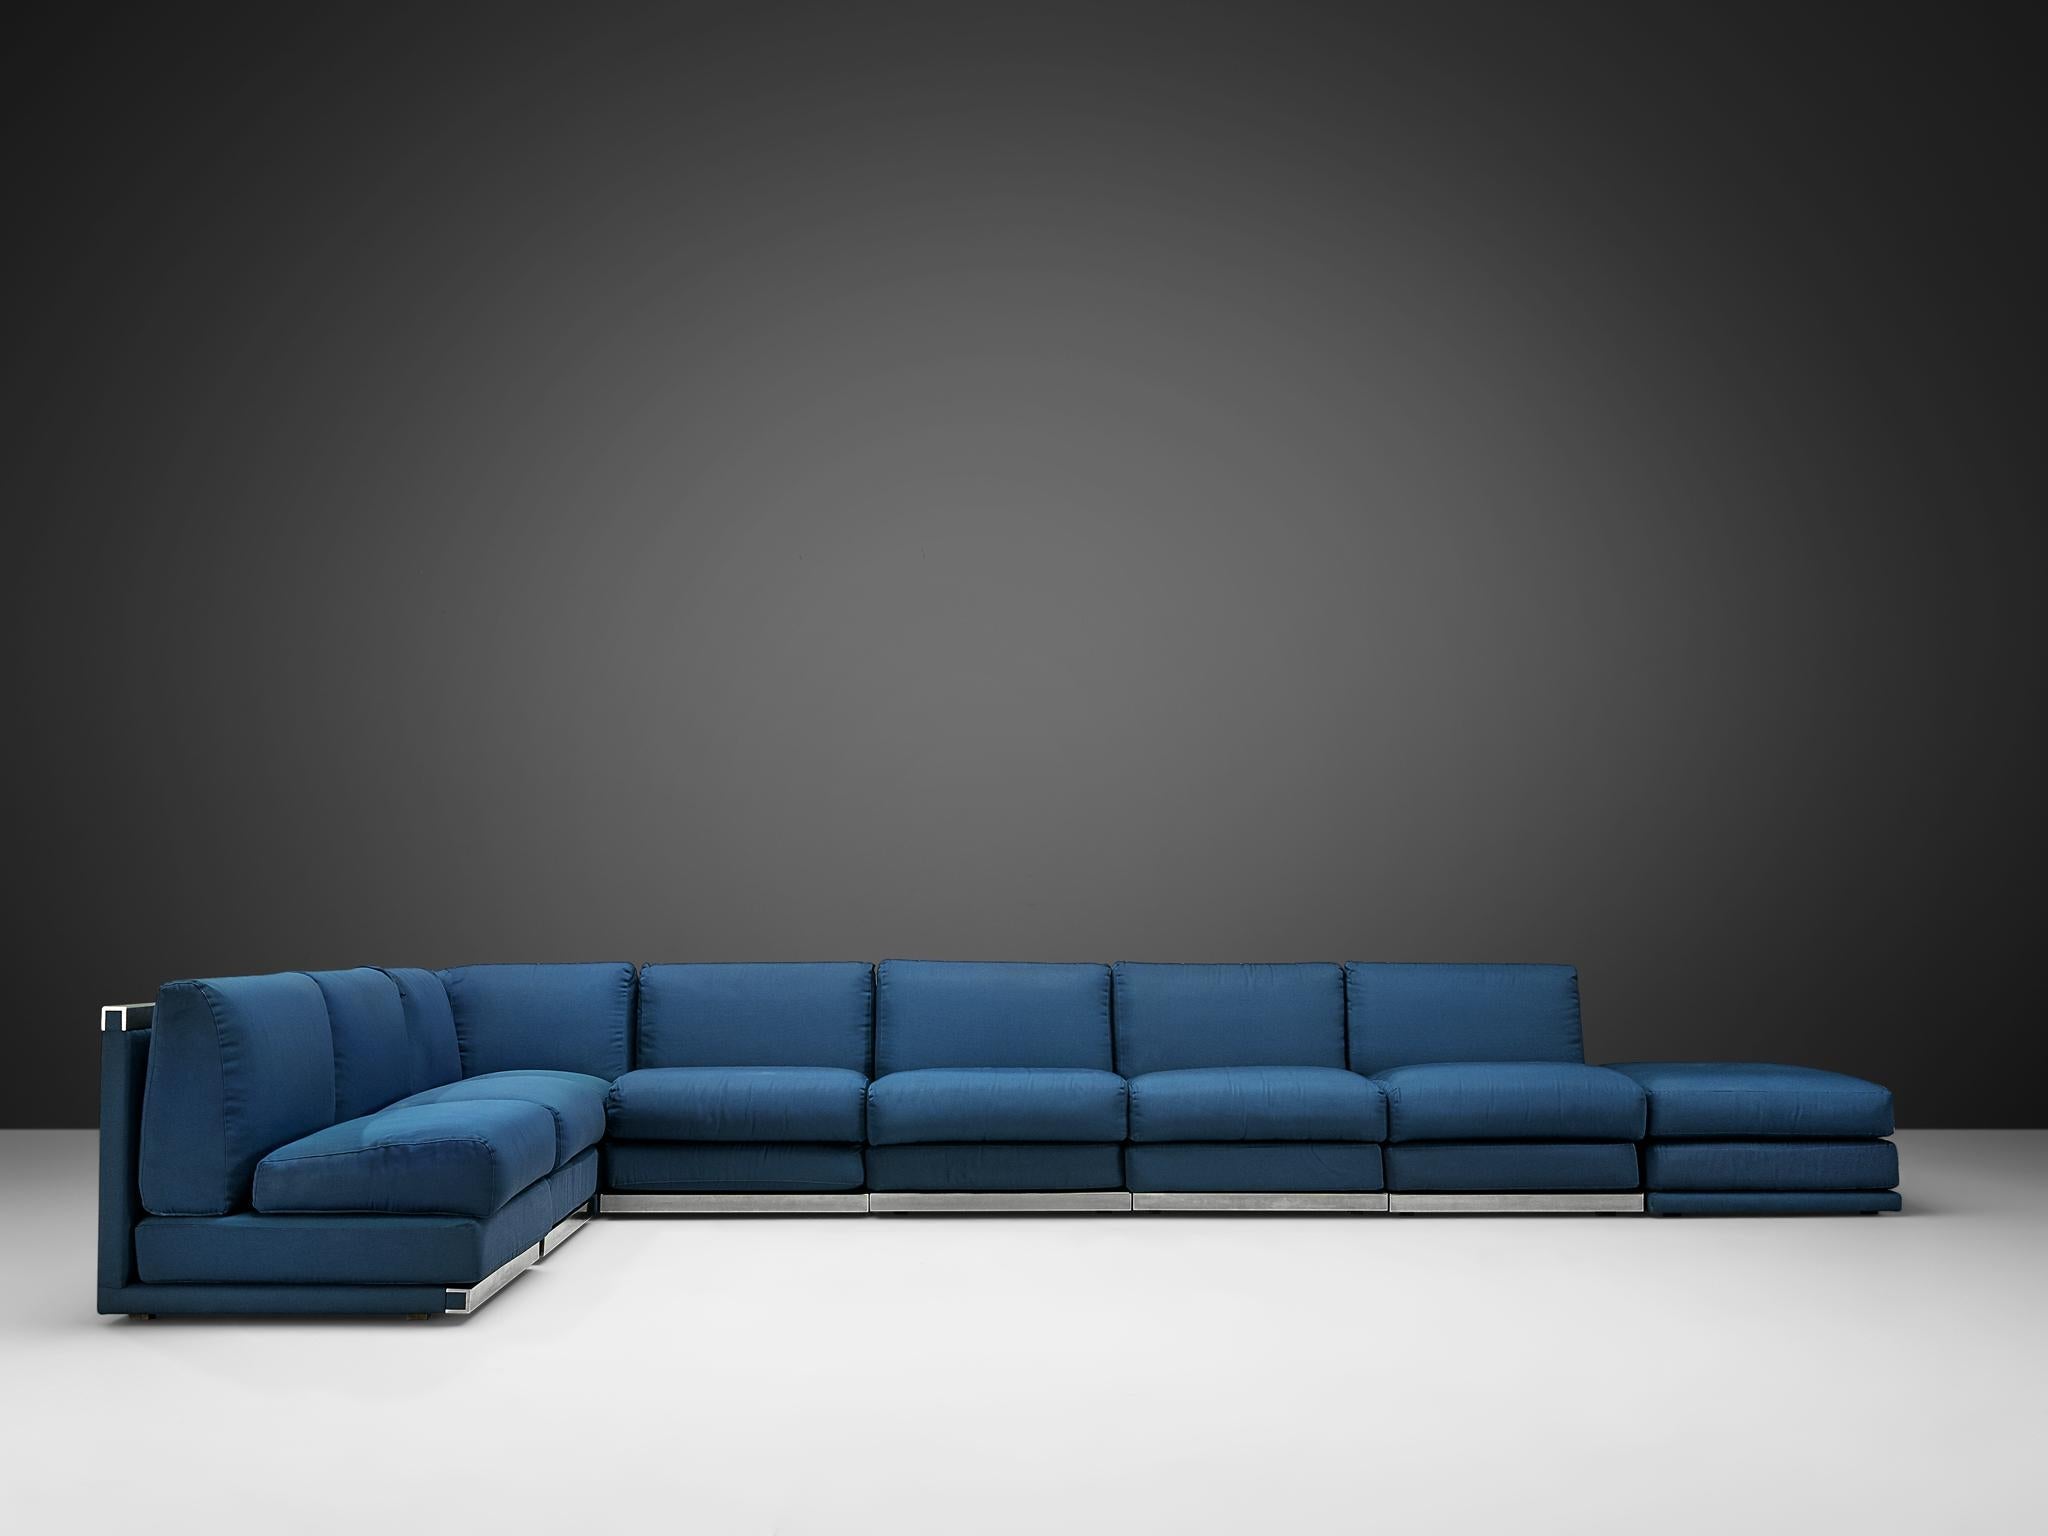 Large Postmodern Sectional Sofa in Blue Upholstery and Aluminum